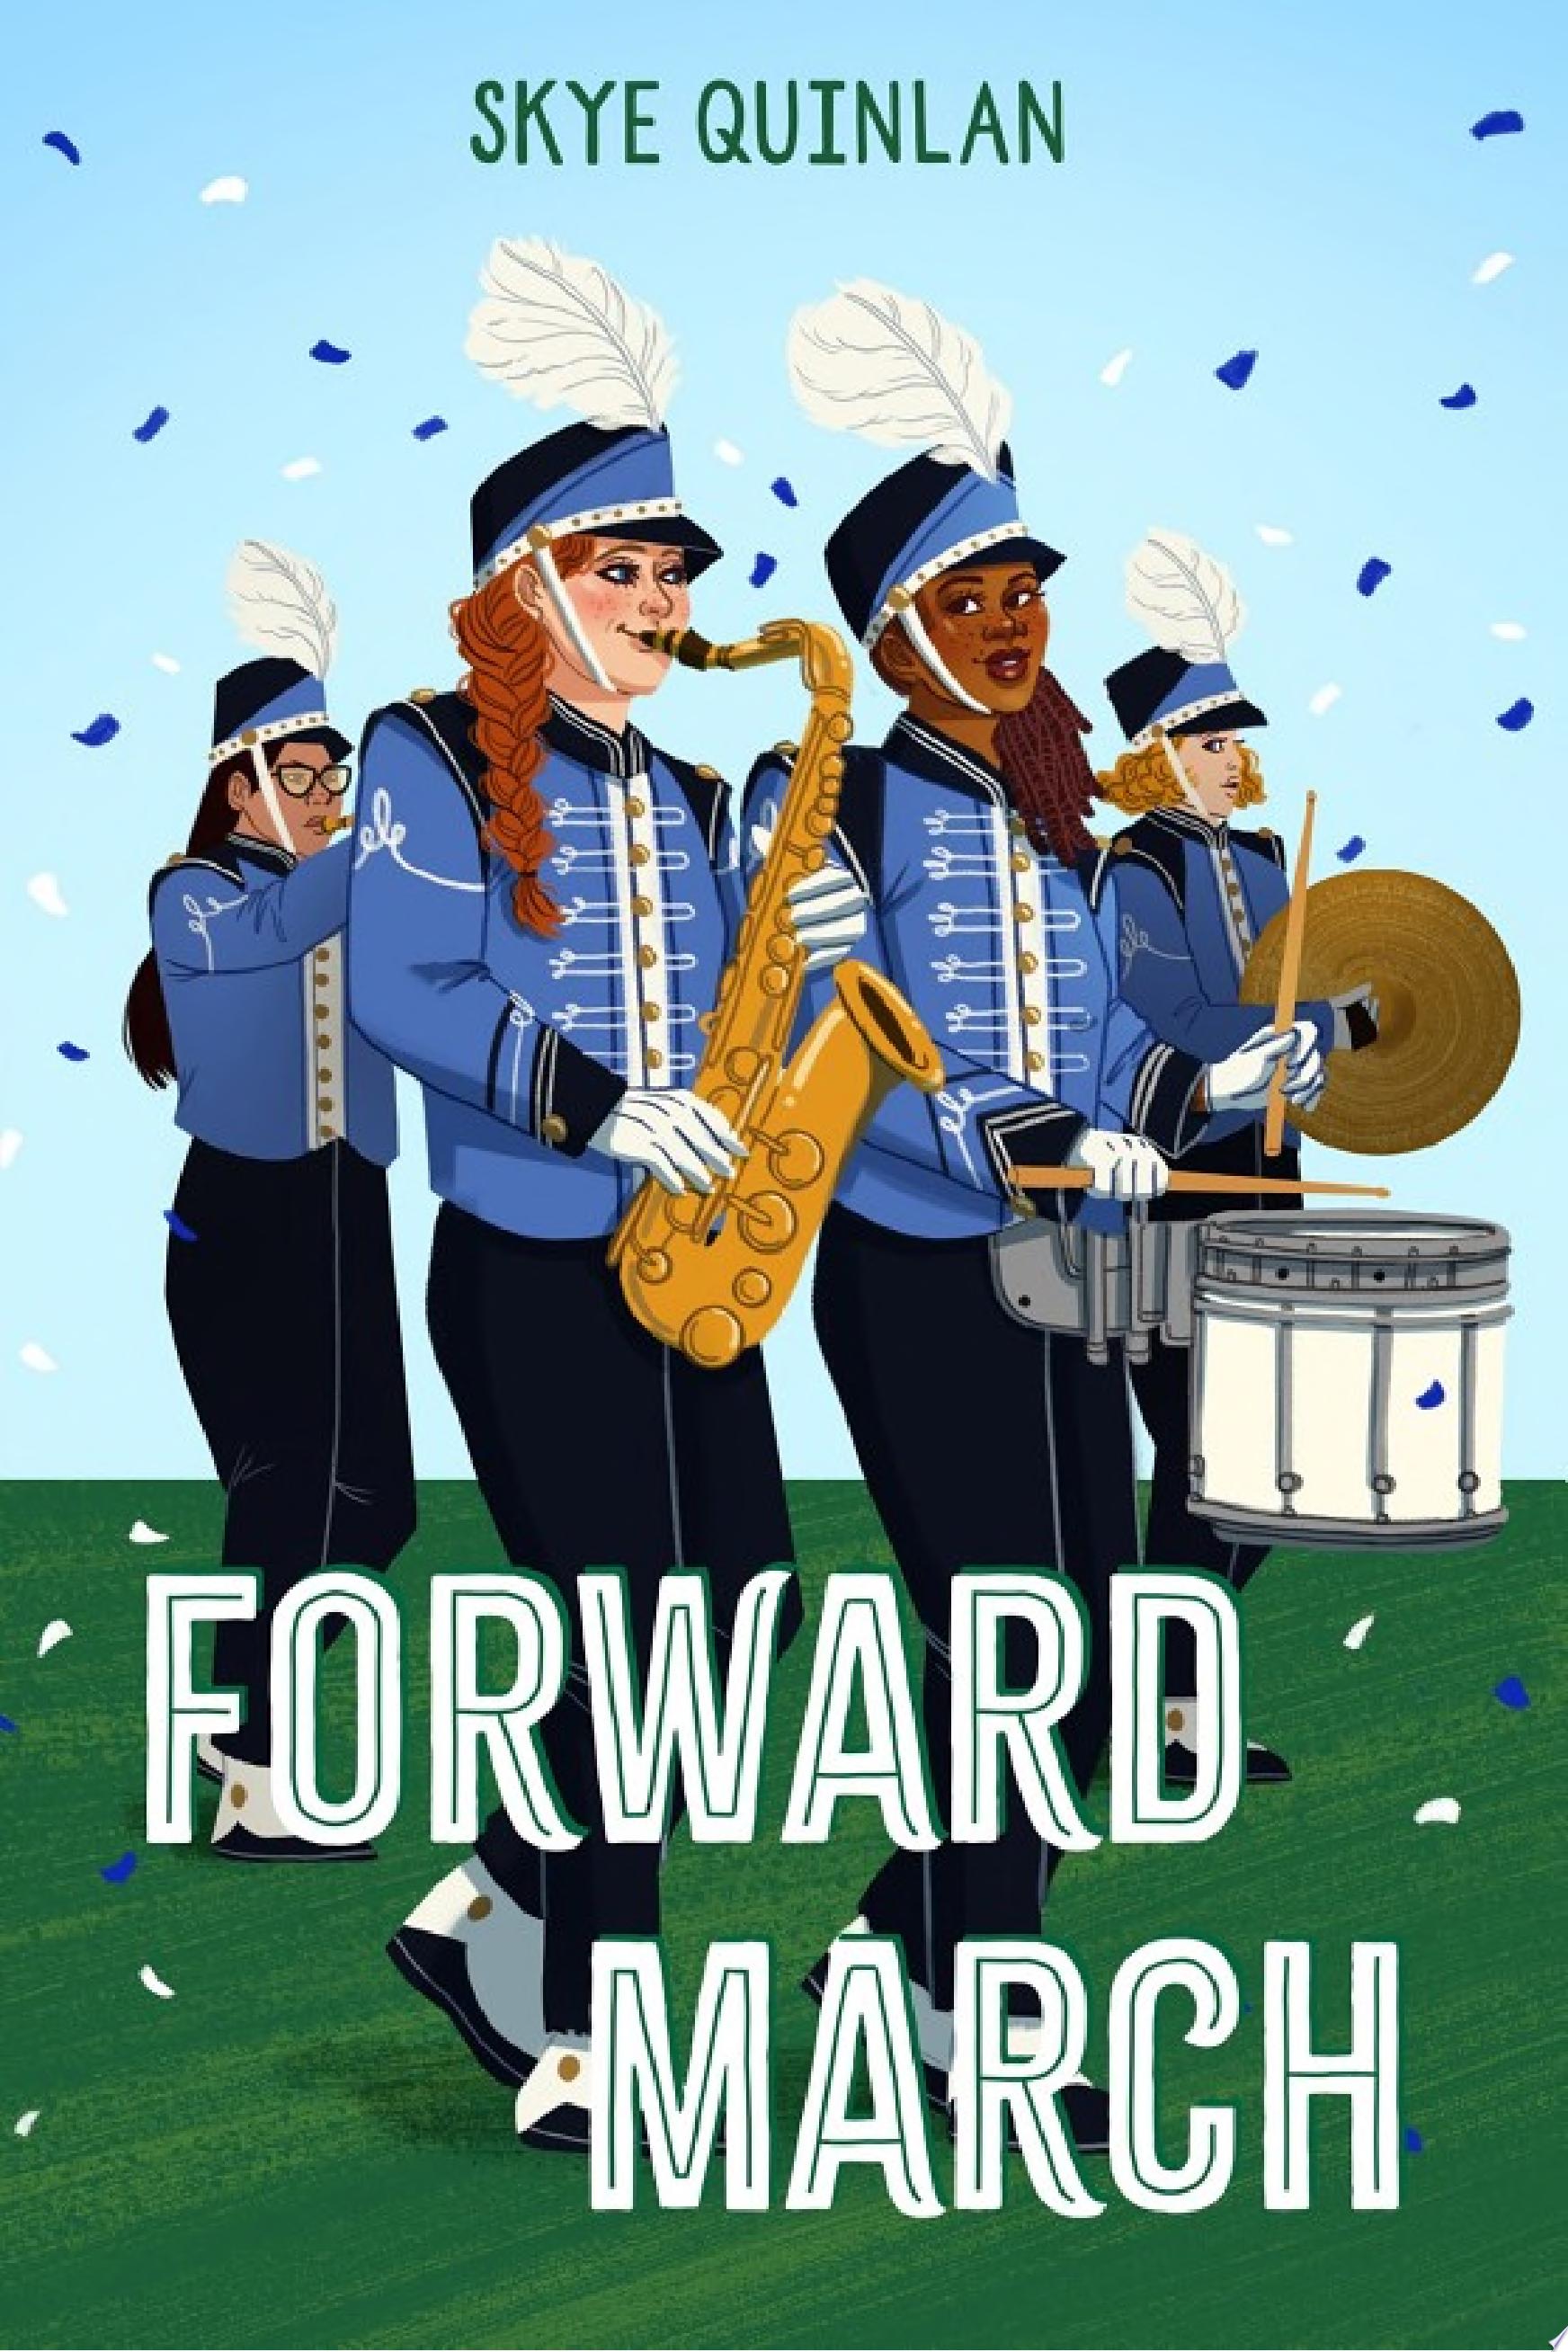 Image for "Forward March"